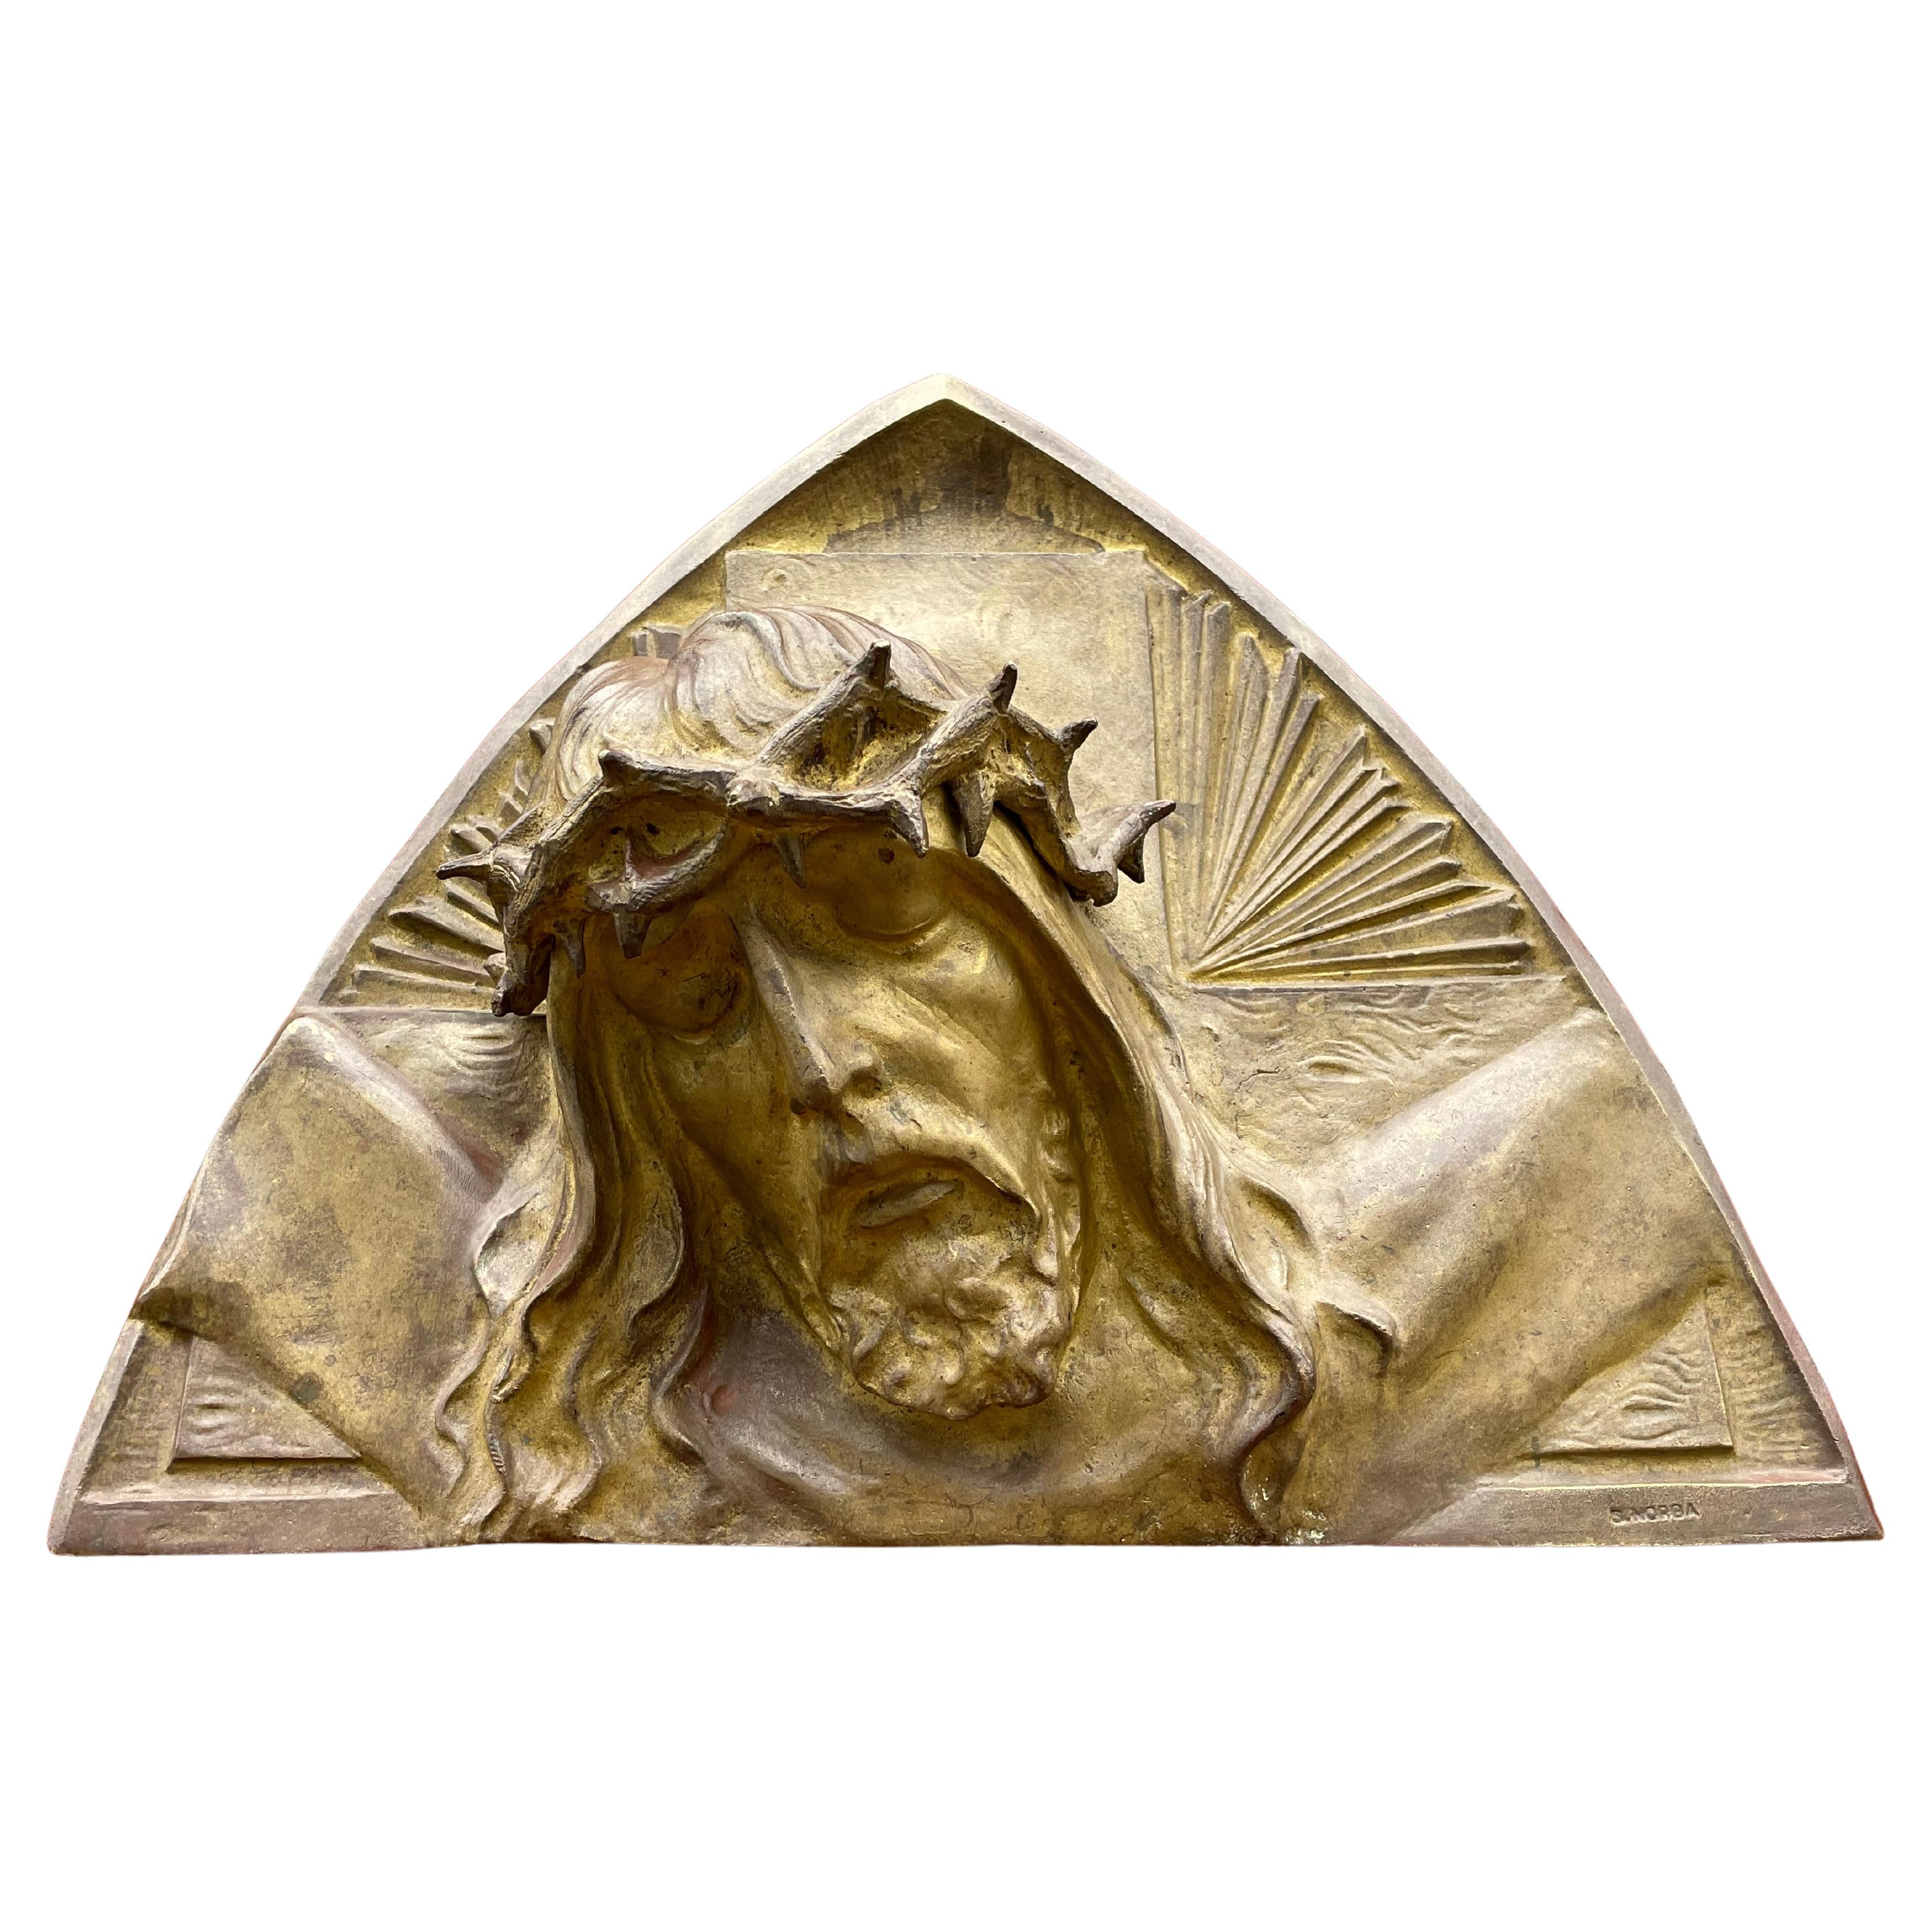 Gilt Bronze Art Deco Wall Sculpture of Christ with Crown of Thorns by S. Norga